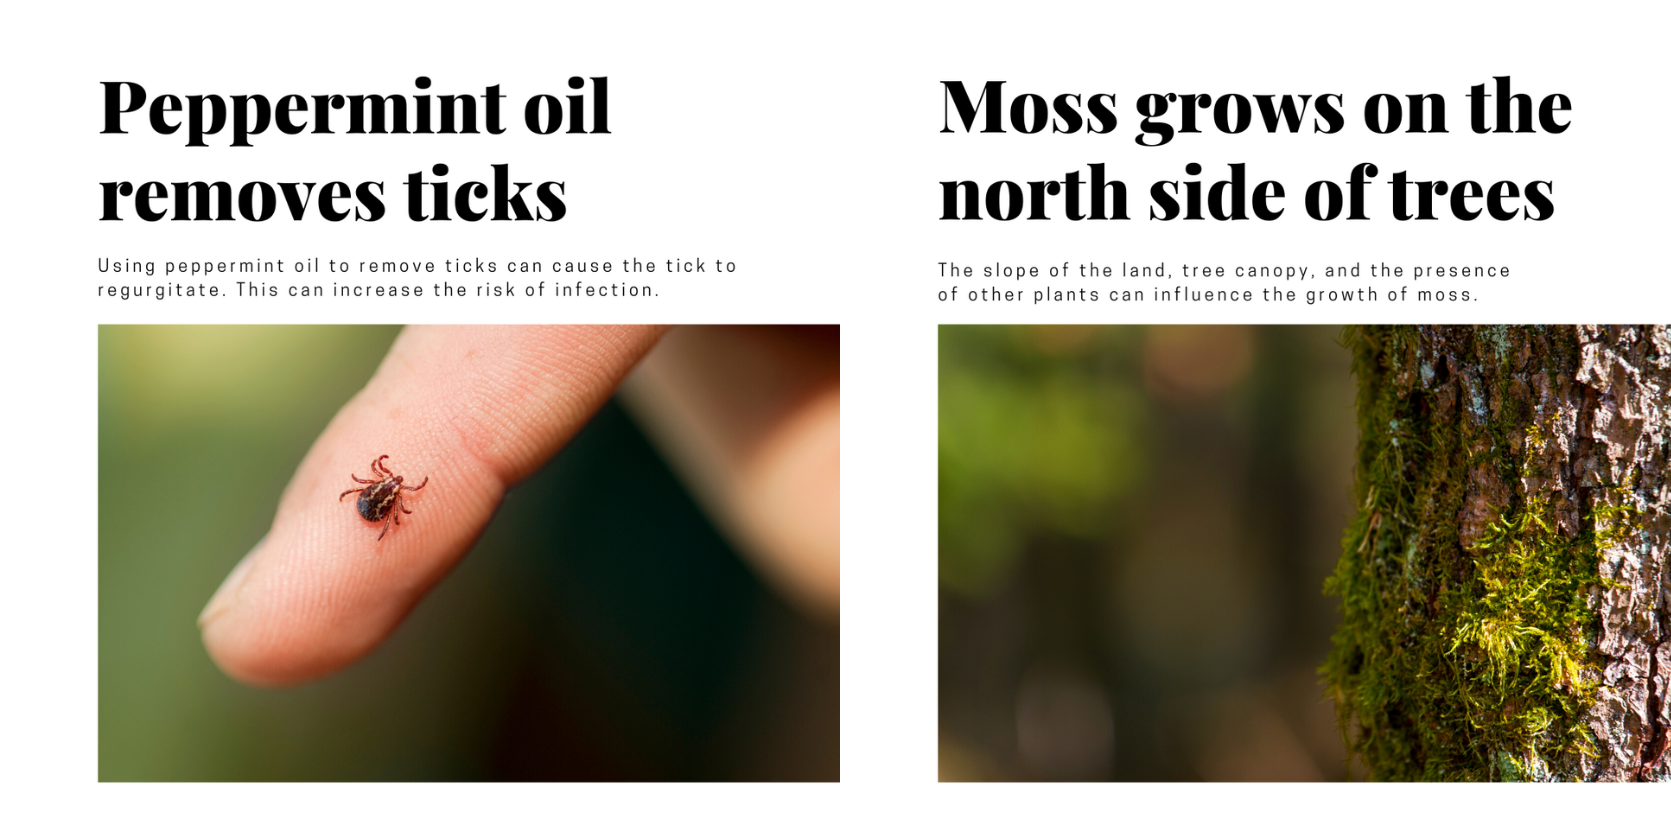 Outdoor Myths Debunked:

Peppermint oil could cause a tick to regurgitate and increase the likelihood of infection.

Moss growth depends on a variety of conditions. Sometimes it grows on the north side of trees, but often it can be found growing in all directions.